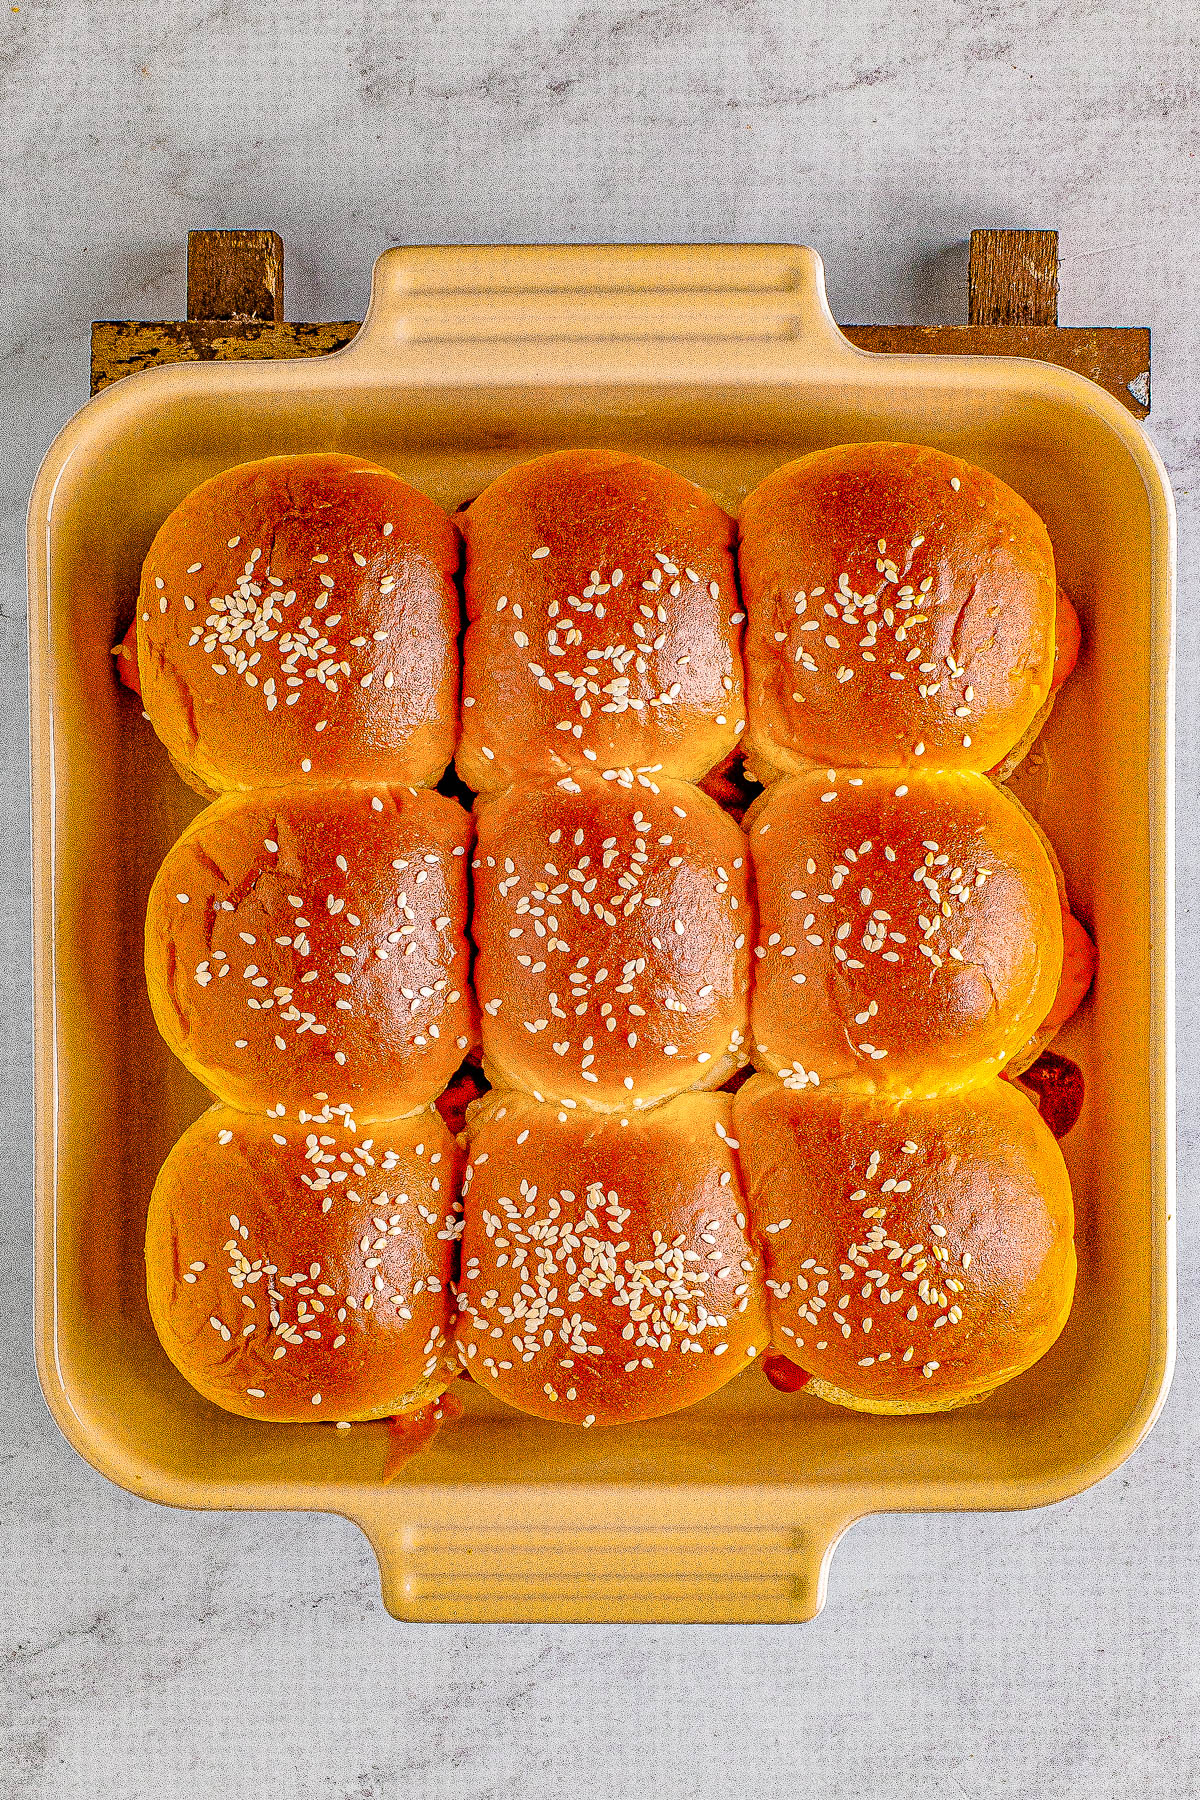 Big Mac Sliders - For anyone who likes the restaurant version, you're going to LOVE this homemade big mac copycat recipe in handheld slider form! Complete with a COPYCAT big mac special sauce, melted cheese, pickles, and tender beef all nestled between soft buttery buns. These EASY sandwiches are a family favorite FAST dinner recipe or make them for events, holidays, or game day parties!